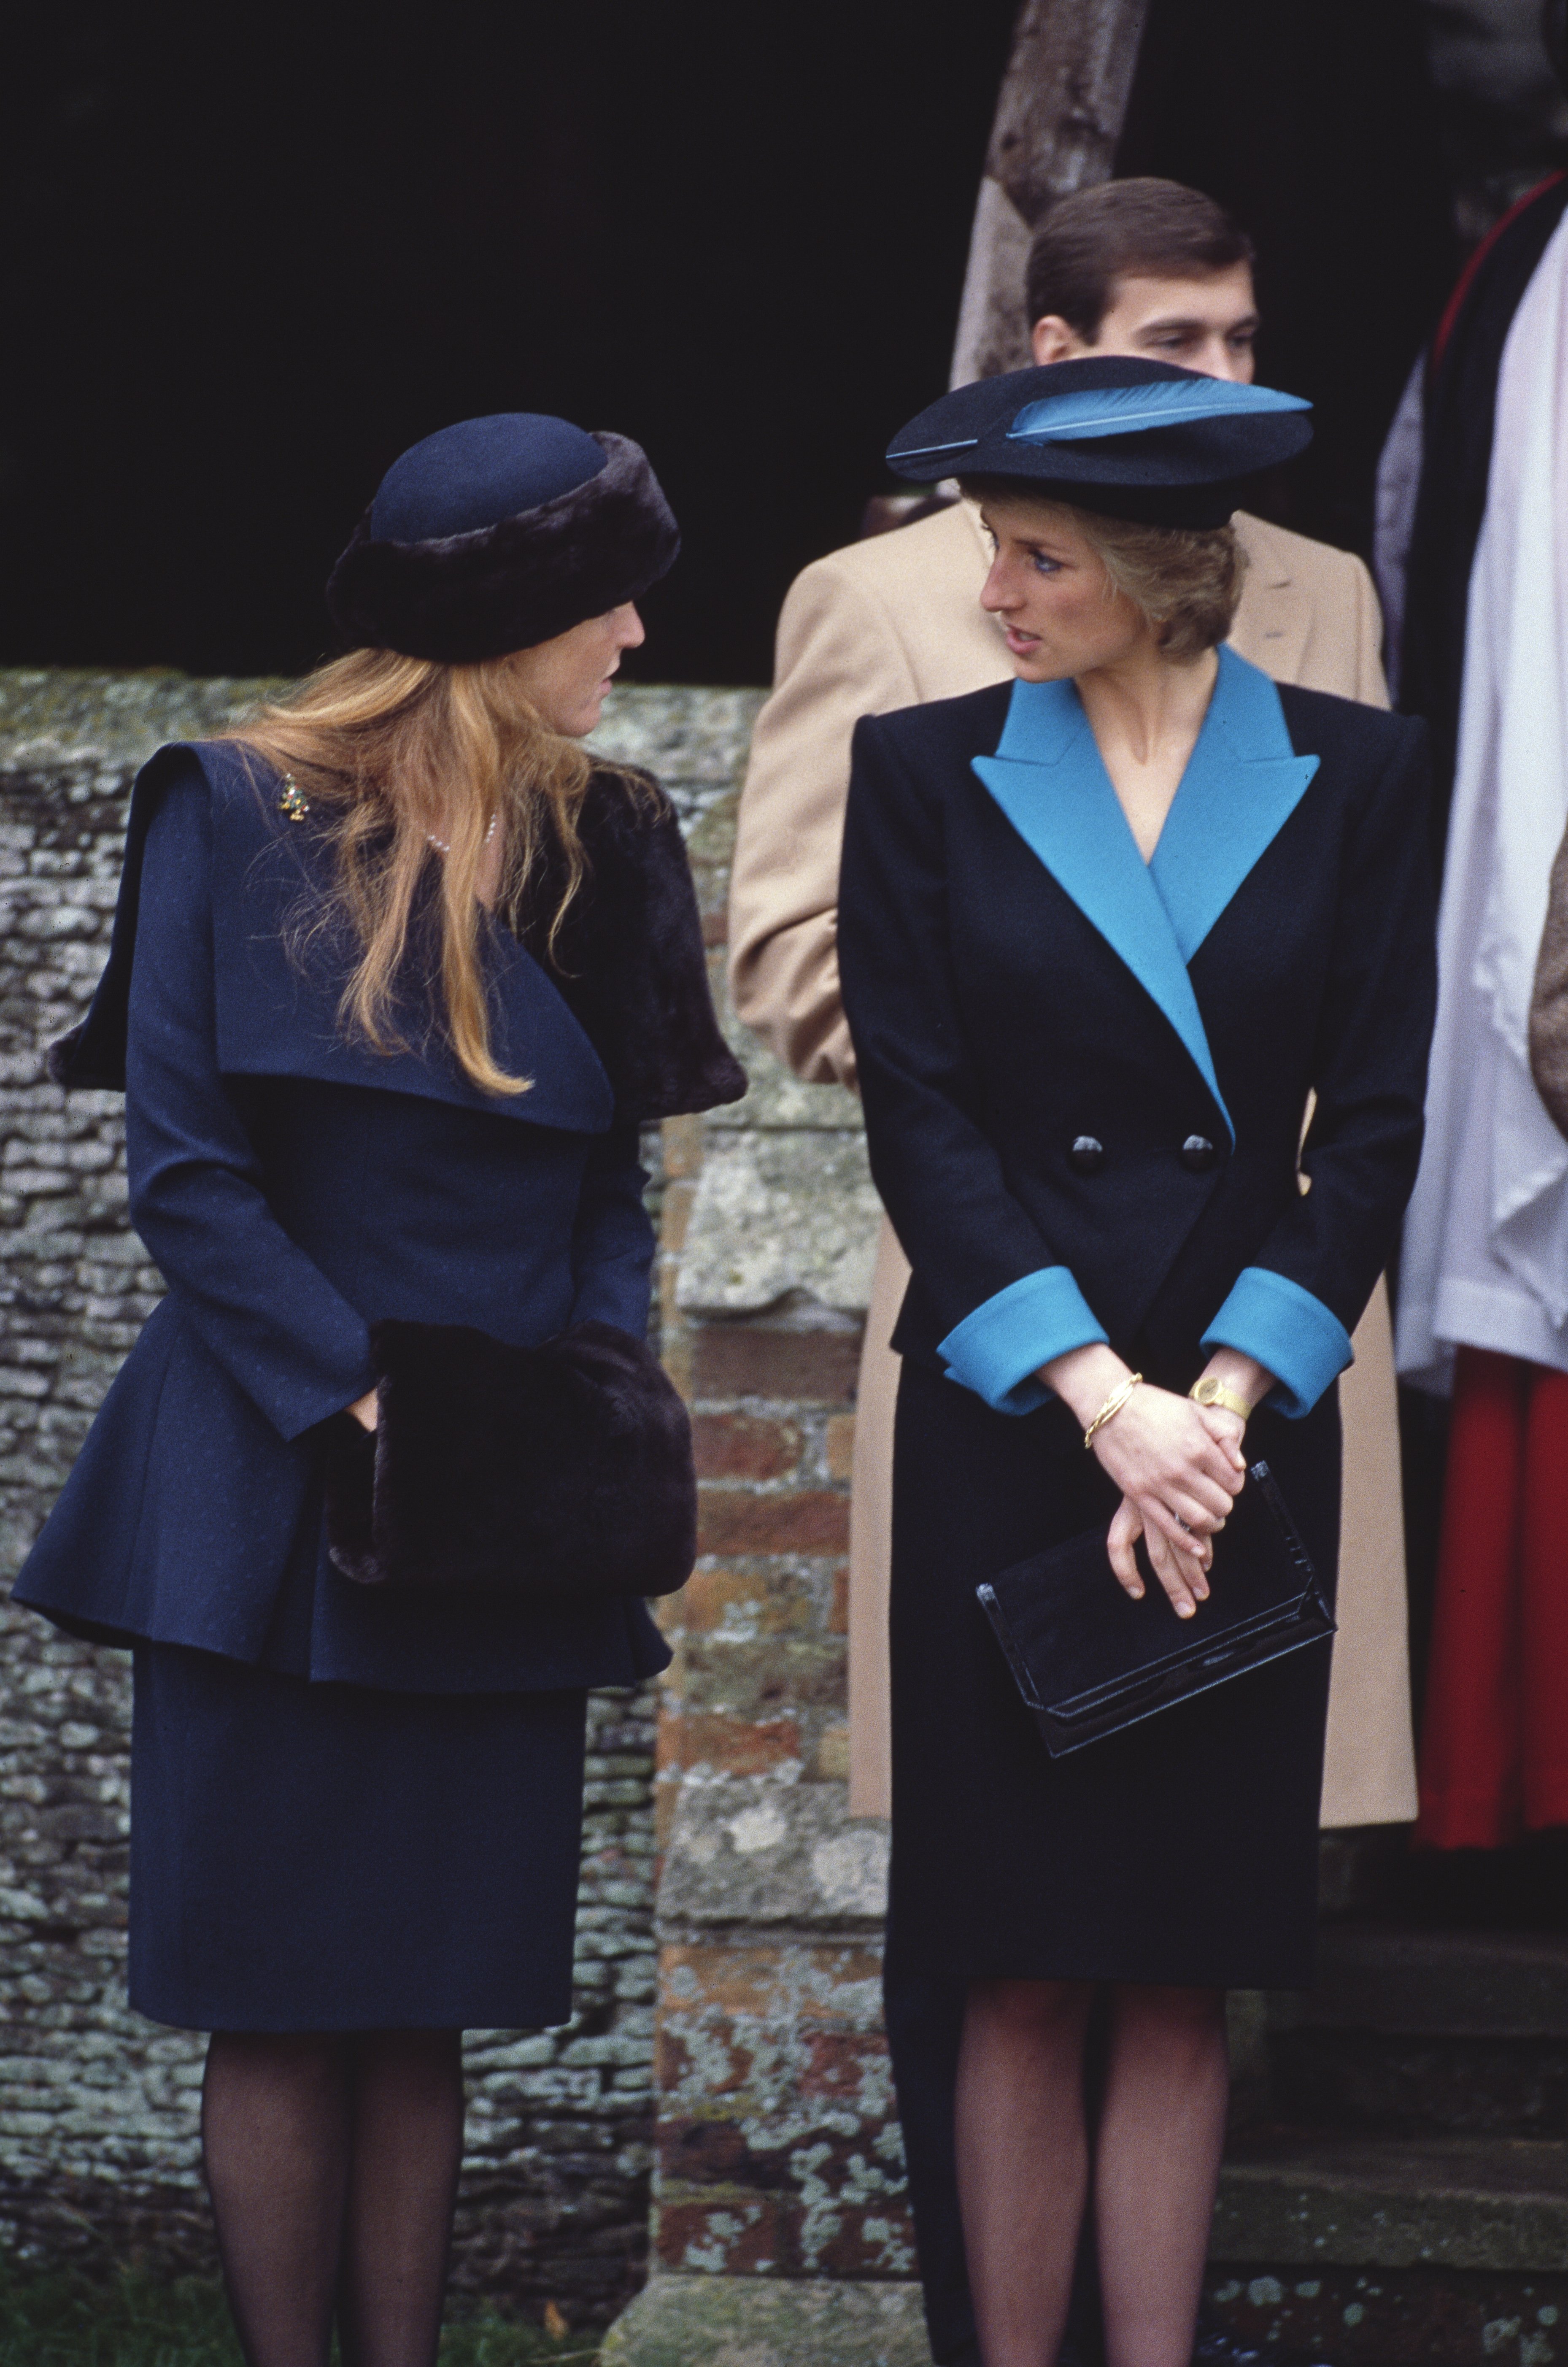 Sarah, Duchess of York and Diana, Princess of Wales during the Christmas Day service at St Mary Magdalene Church on the Sandringham estate on December 25, 1988 in Norfolk, England. / Source: Getty Images